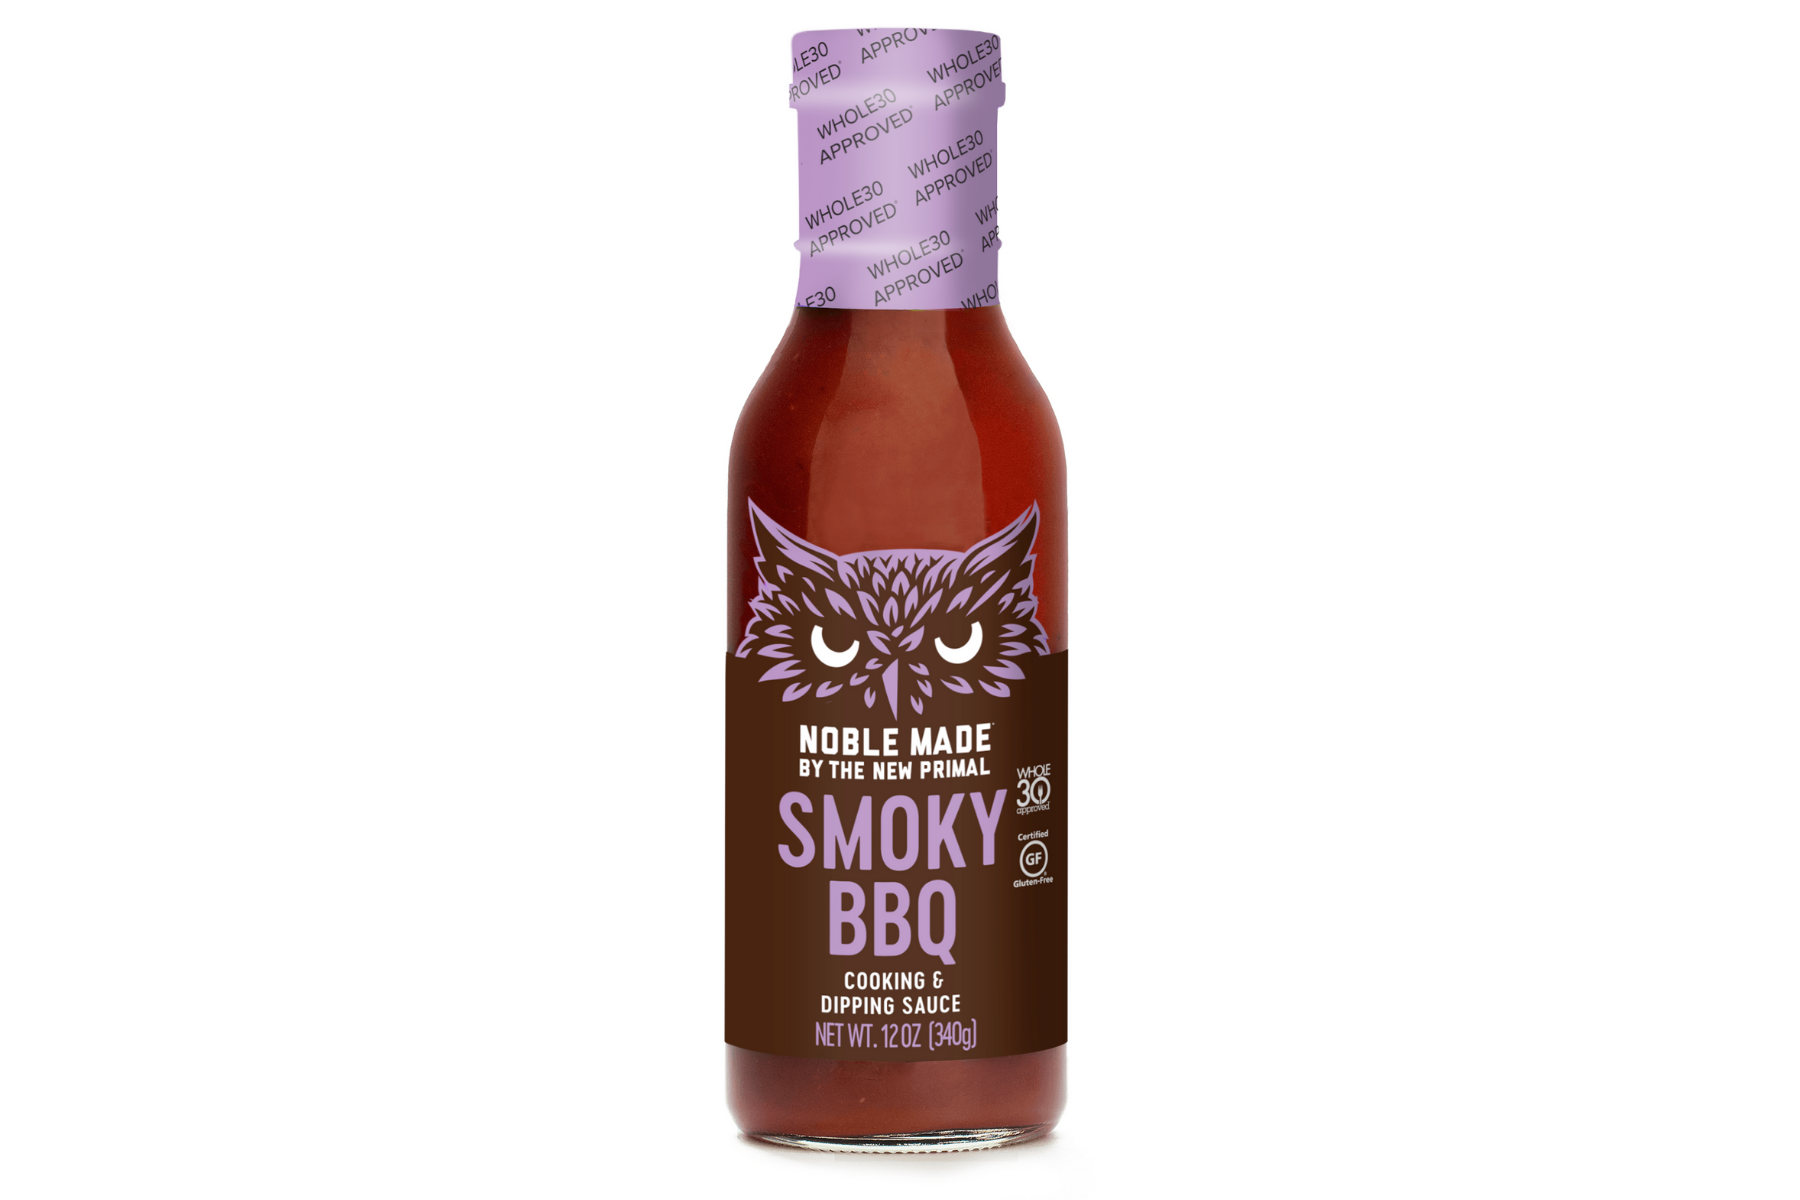 Bottle of Noble Made by The New Primal vegan Smoky BBQ sauce